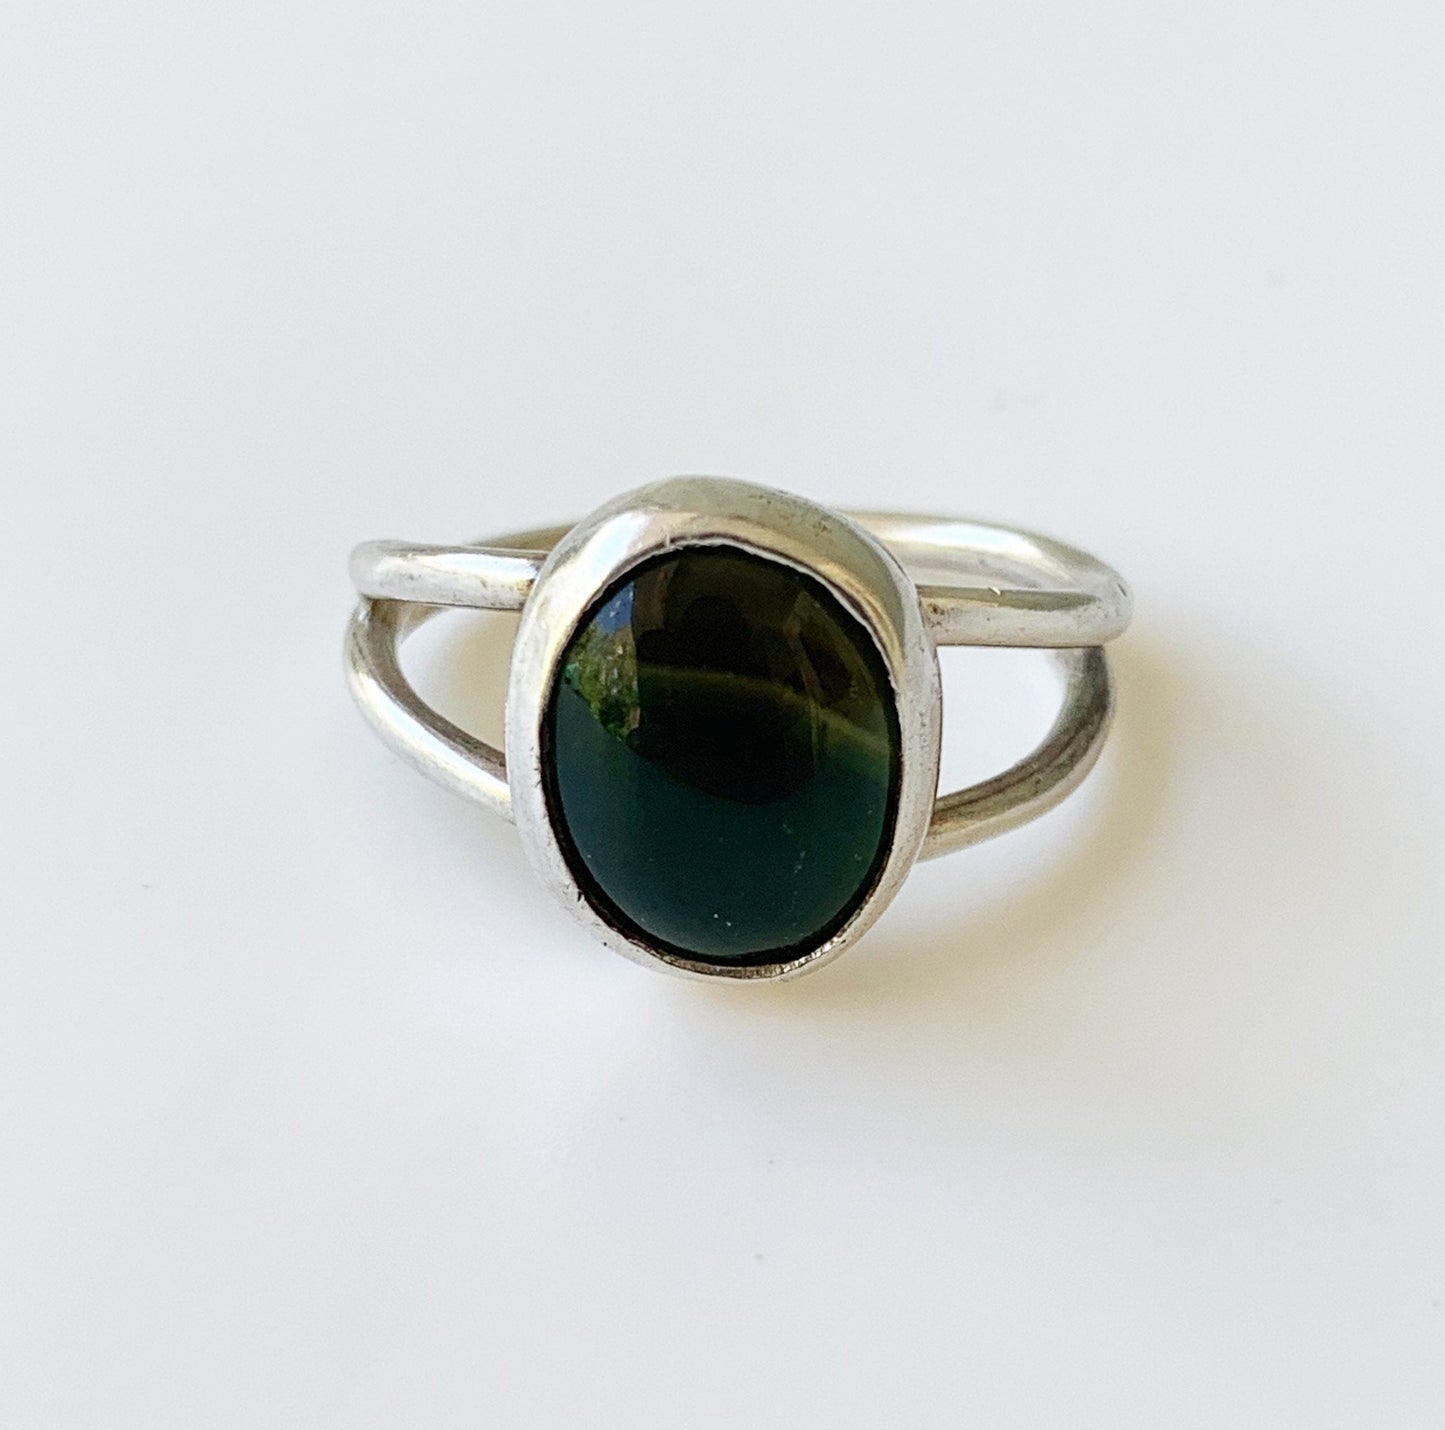 Vintage Silver Agate Ring | Green Banded Agate | US Size 8 Ring